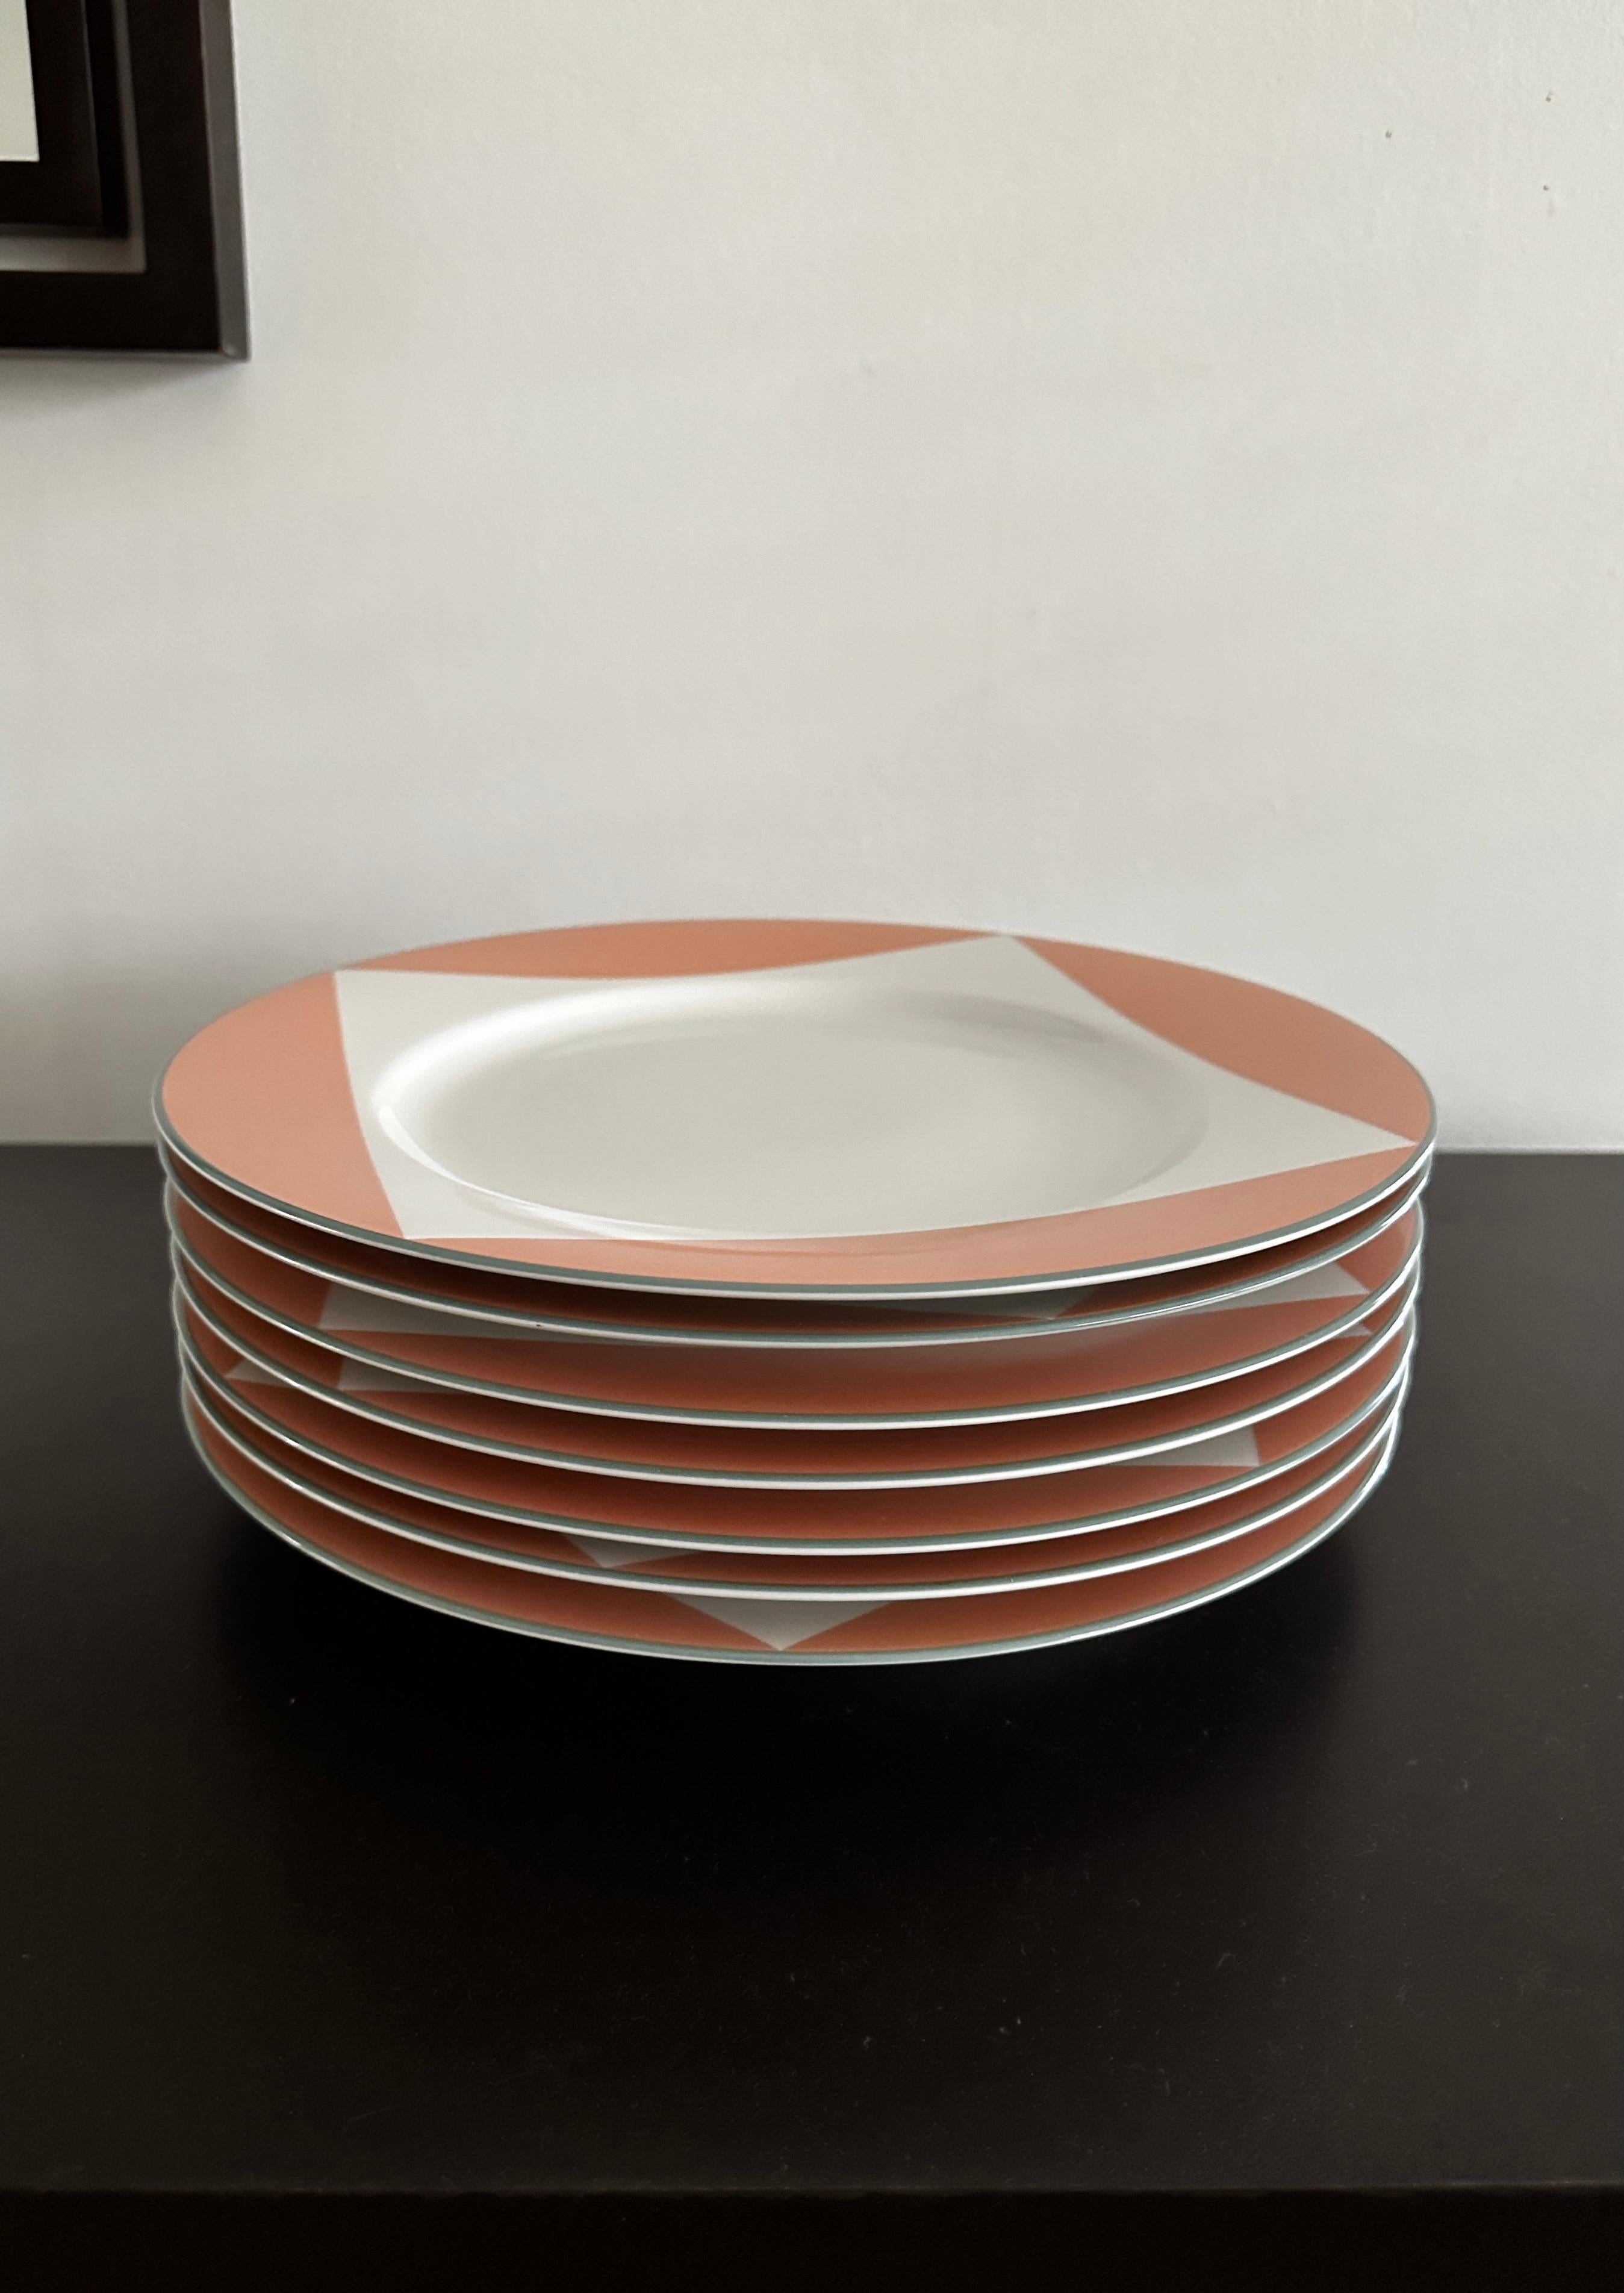 Seven dinner plates designed by Richard Meier for Swid Powell. The dinner plates are in the “Peachtree” pattern, the pattern probably references the location of the High Museum on Peachtree Street in Atlanta, Georgia which was designed by Meier in